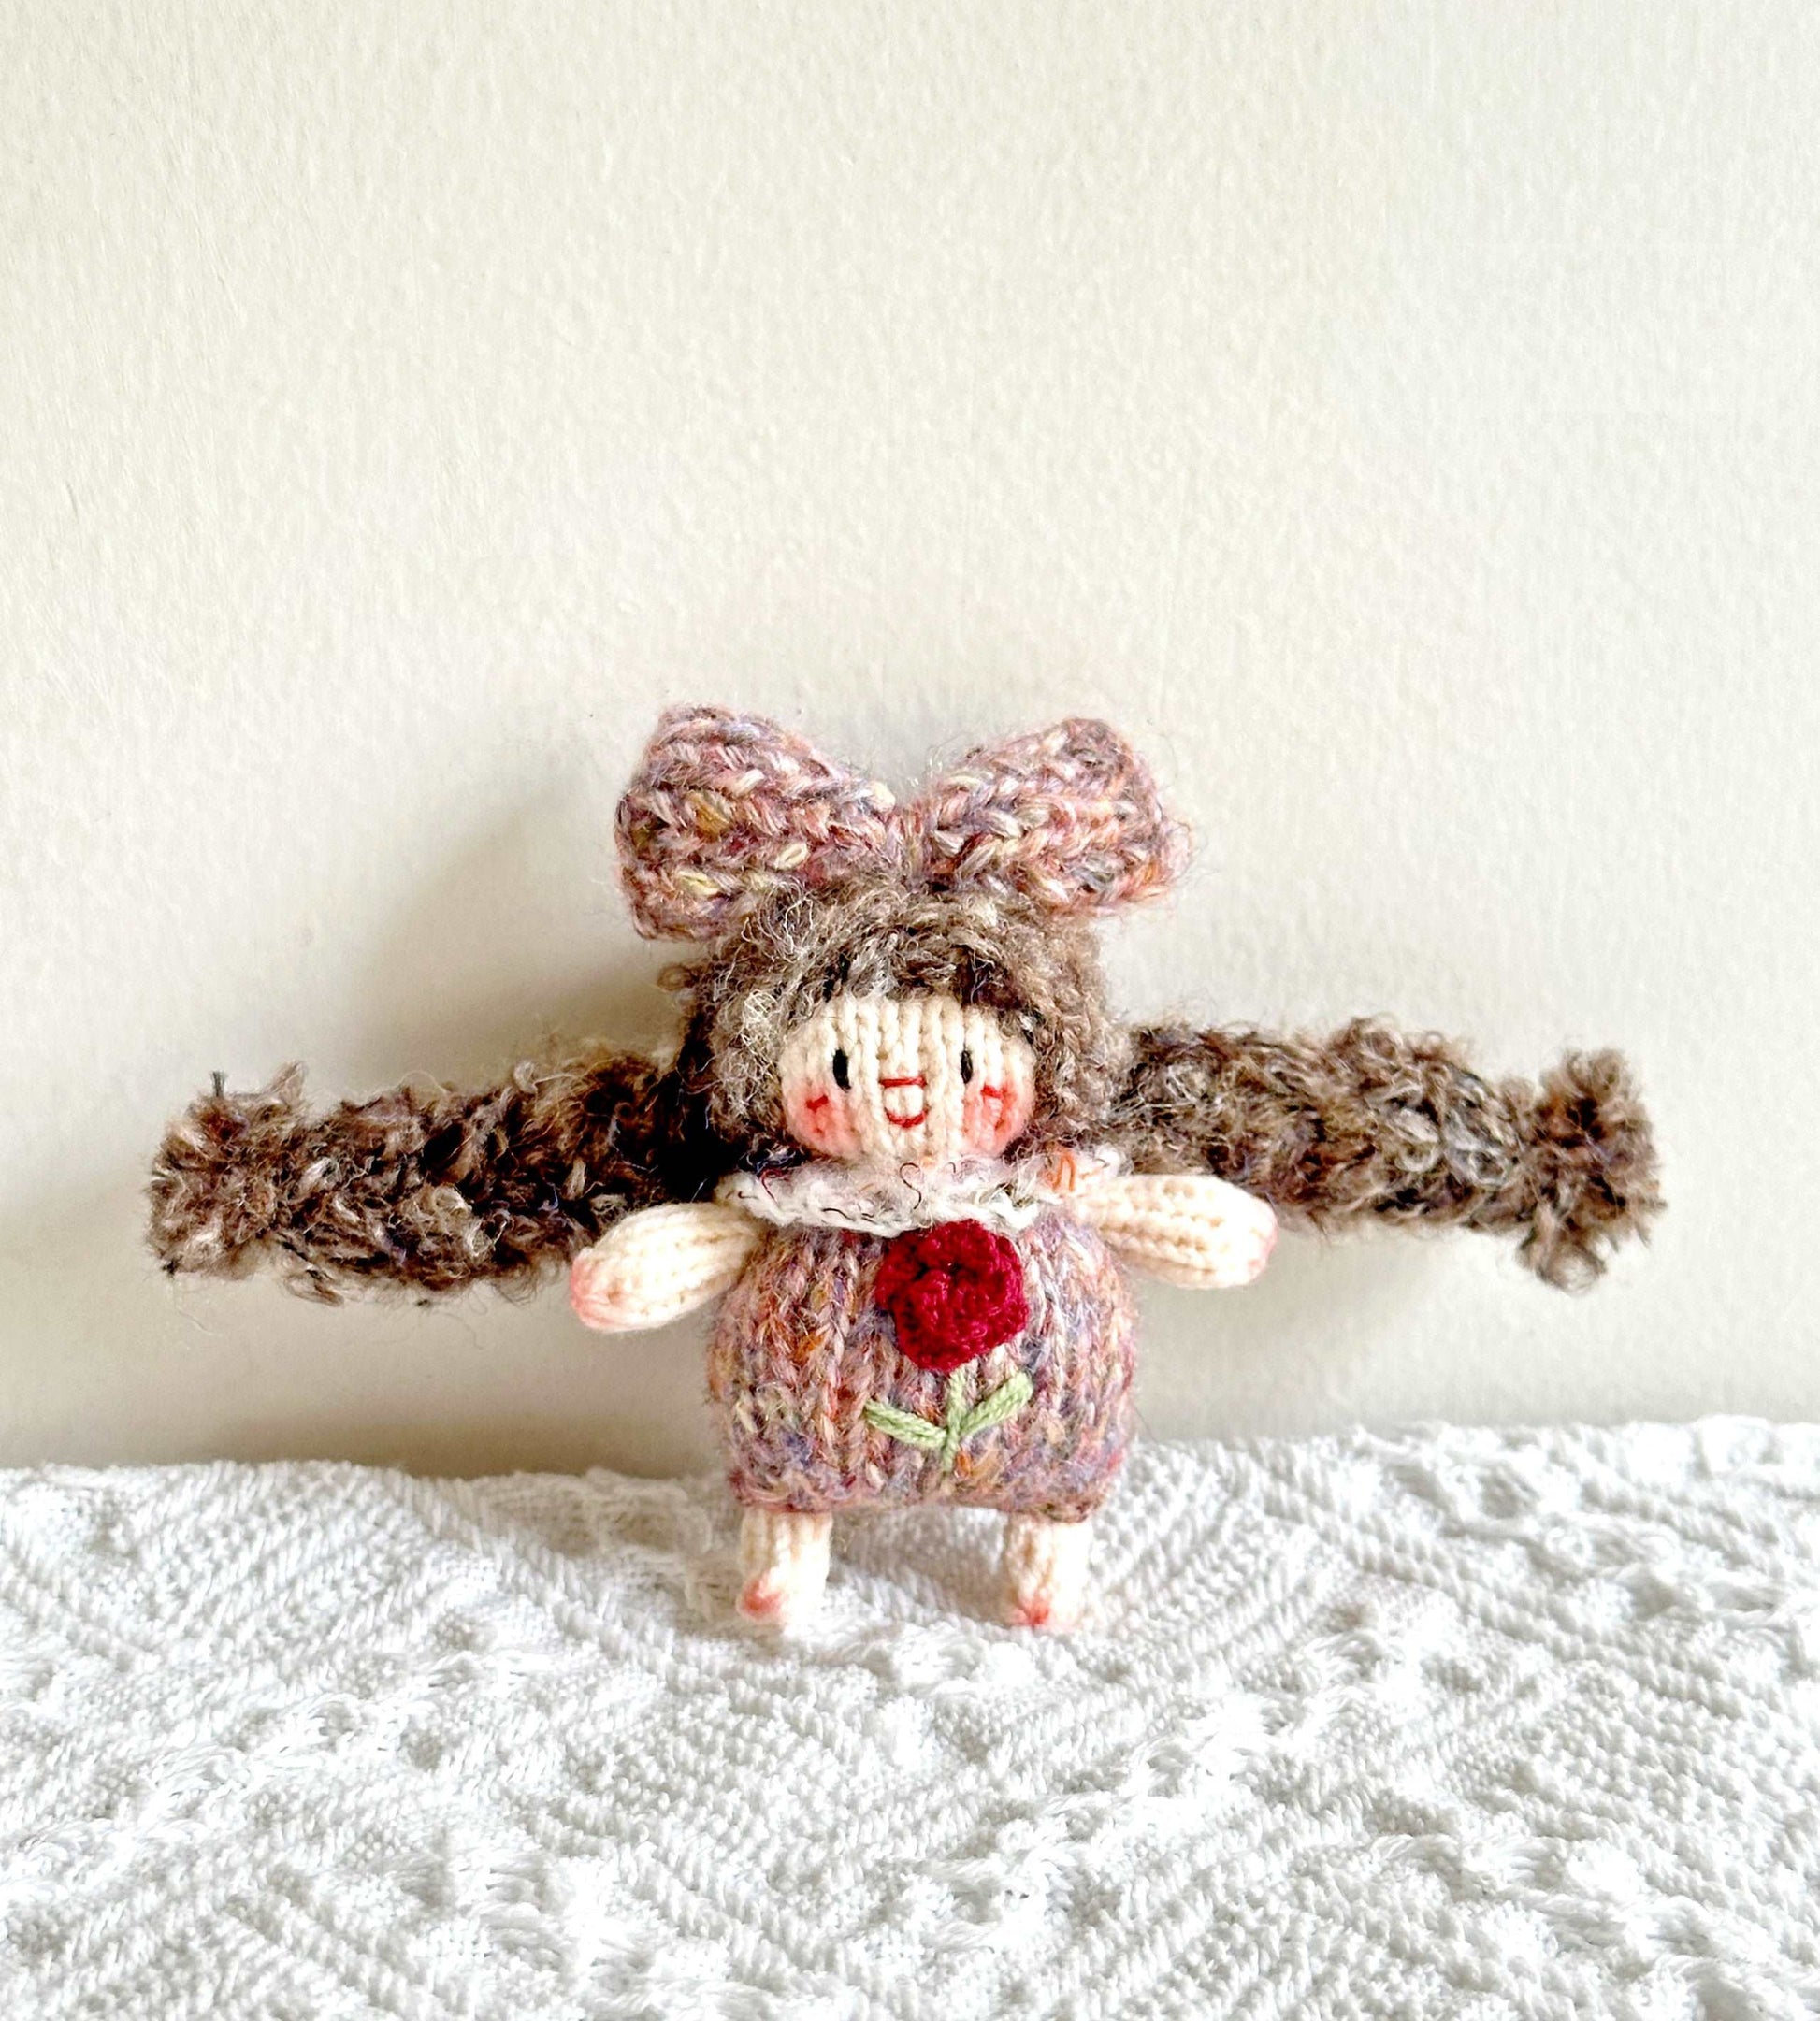 Handmade Crochet Little Girl Toy Decoration for Children's Rooms and Play Areas